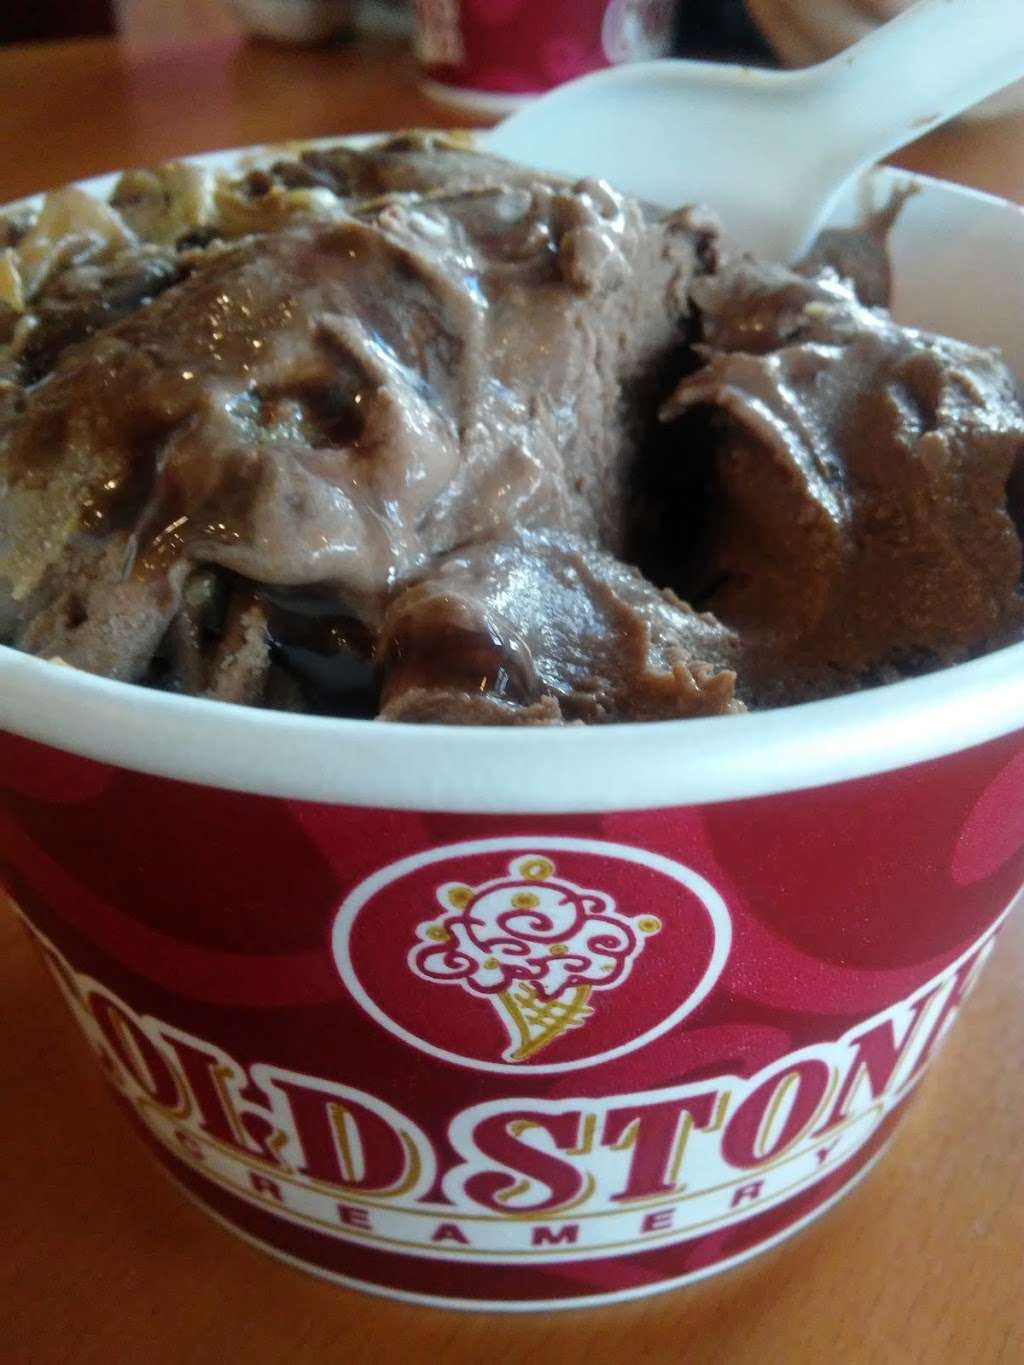 Cold Stone Creamery | 6010 W 86th St Ste 142, Indianapolis, IN 46278 | Phone: (317) 471-8378